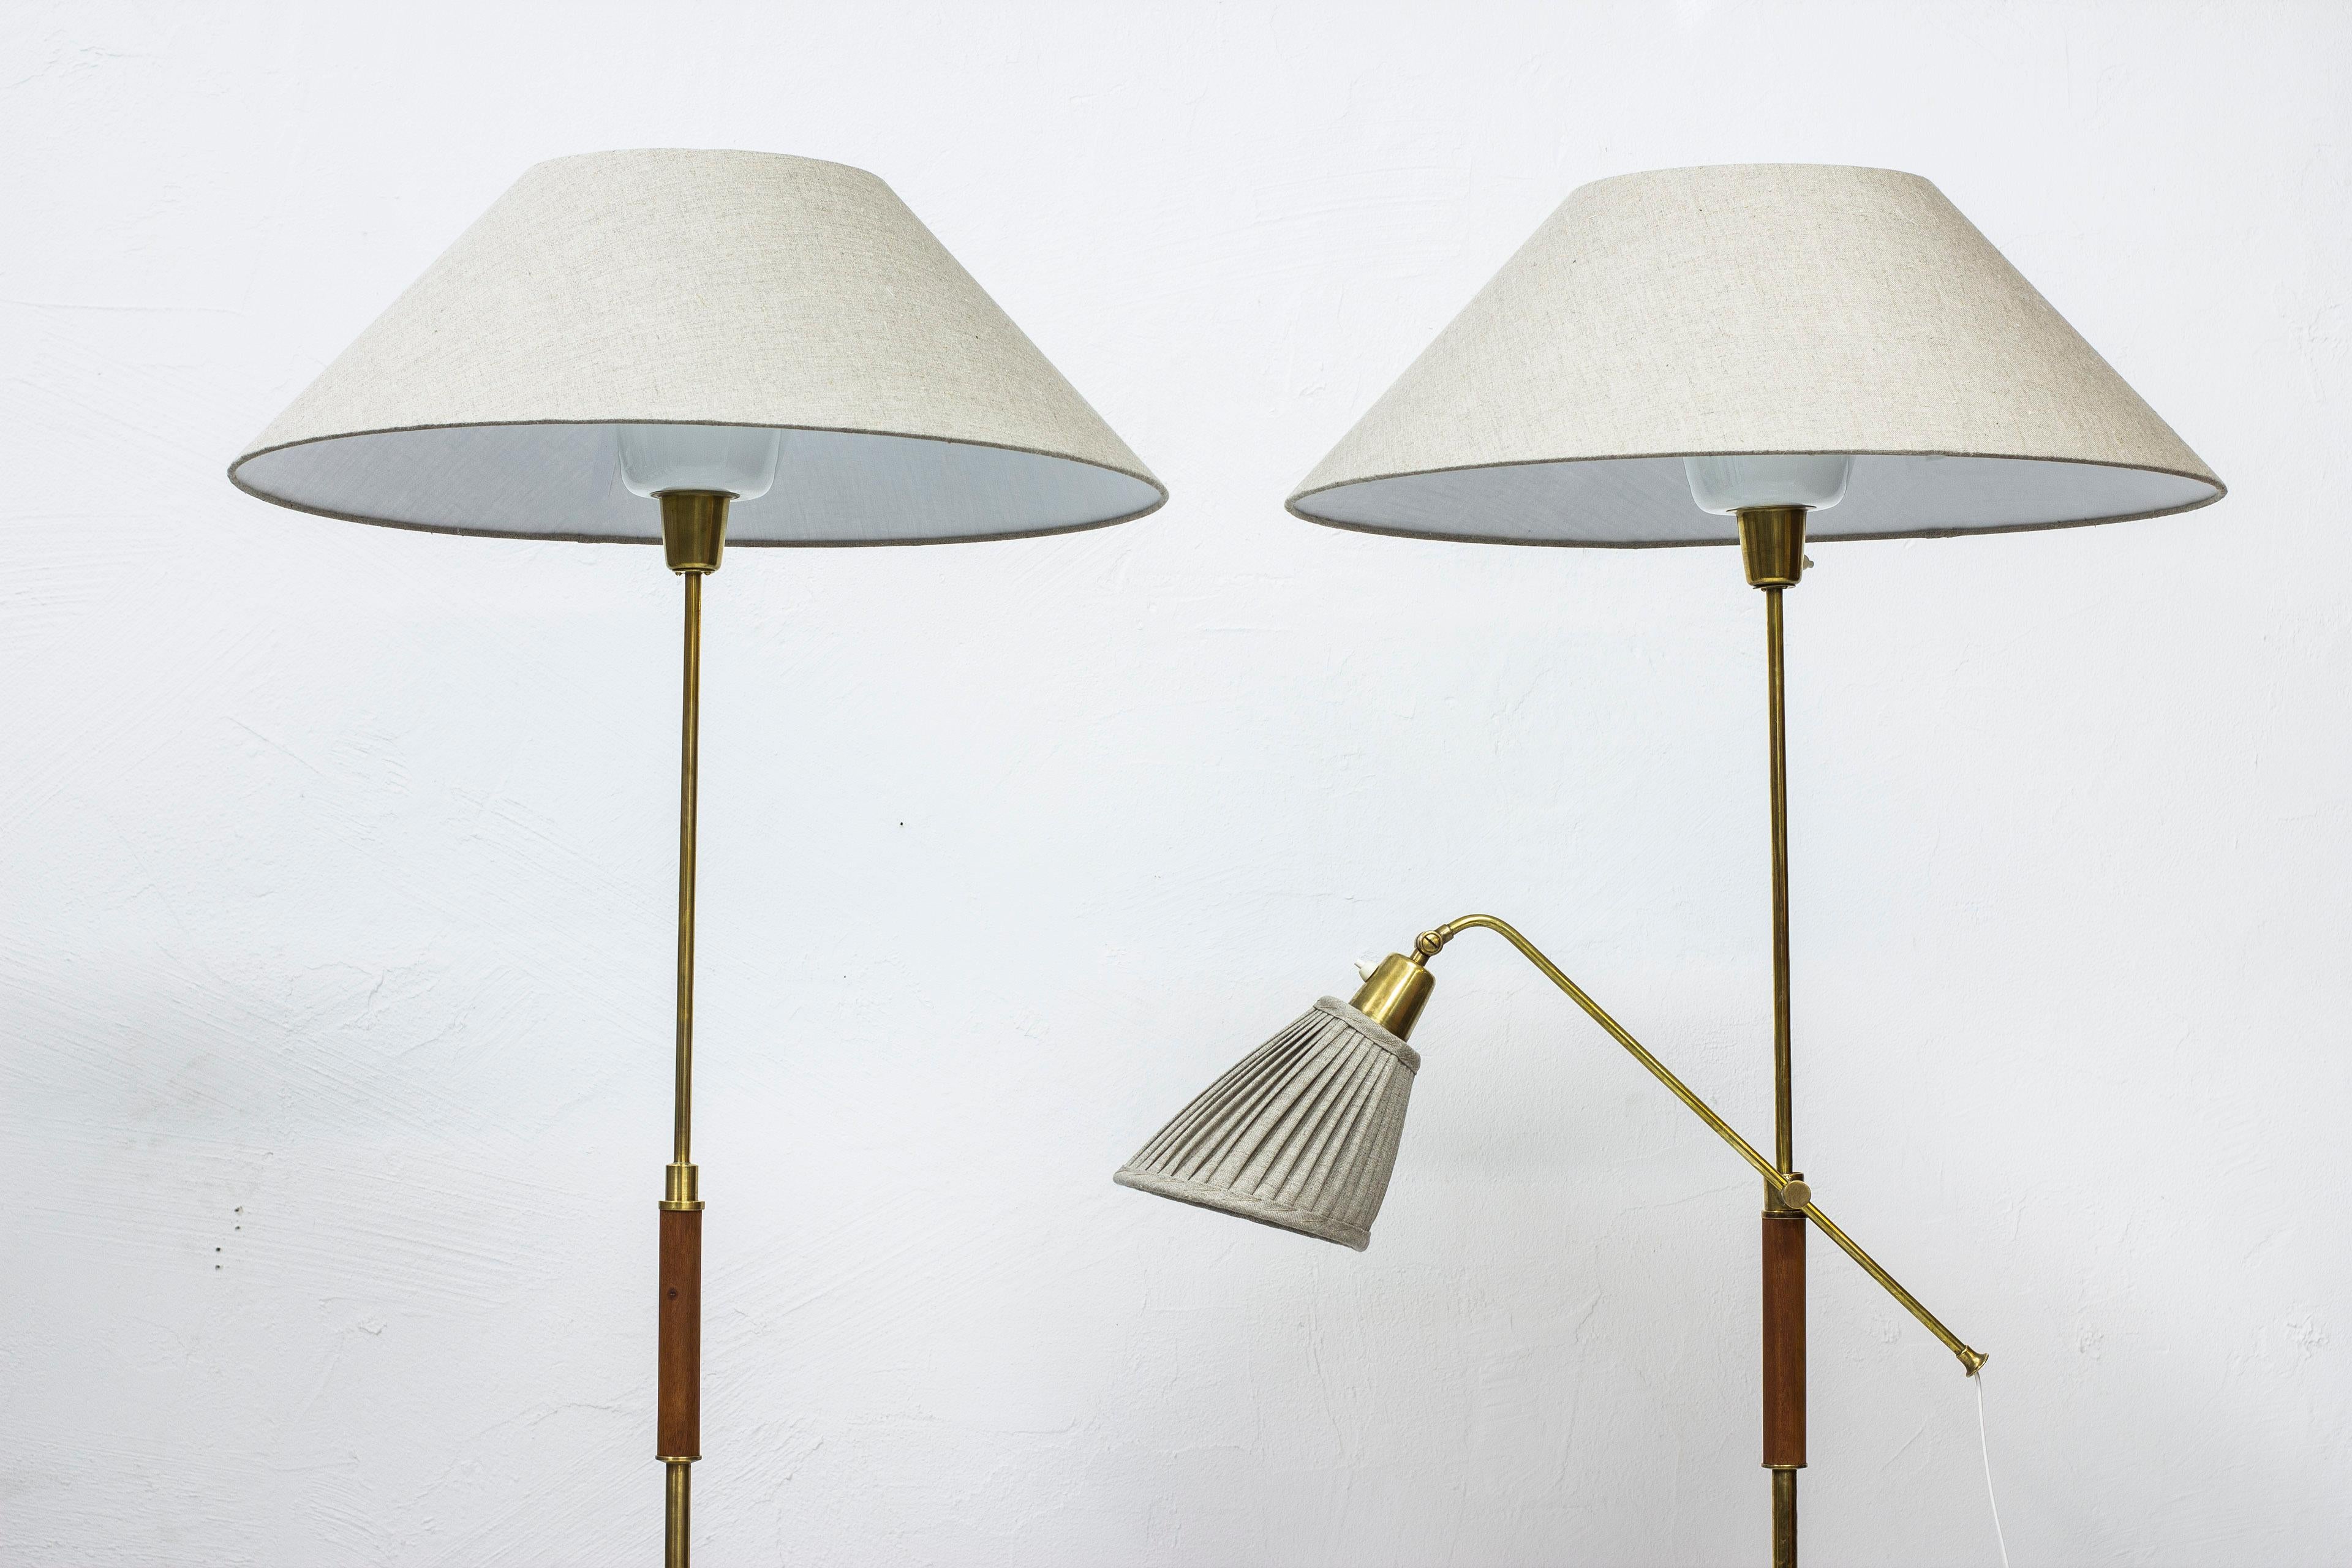 Floor lamps designed ca 1952 by Bertil Brisborg. Produced for the 